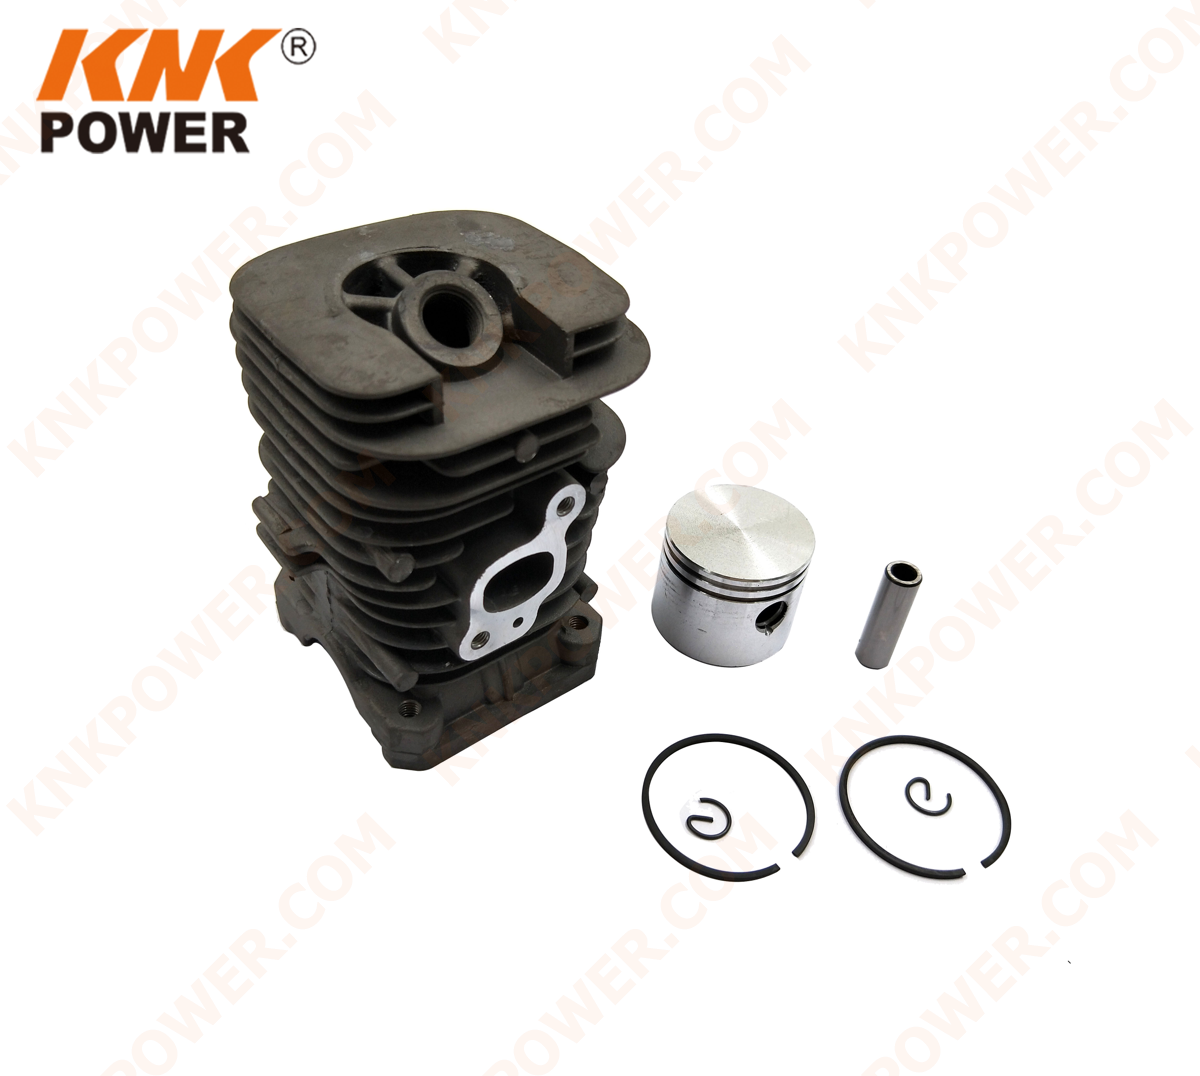 knkpower product image 19289 